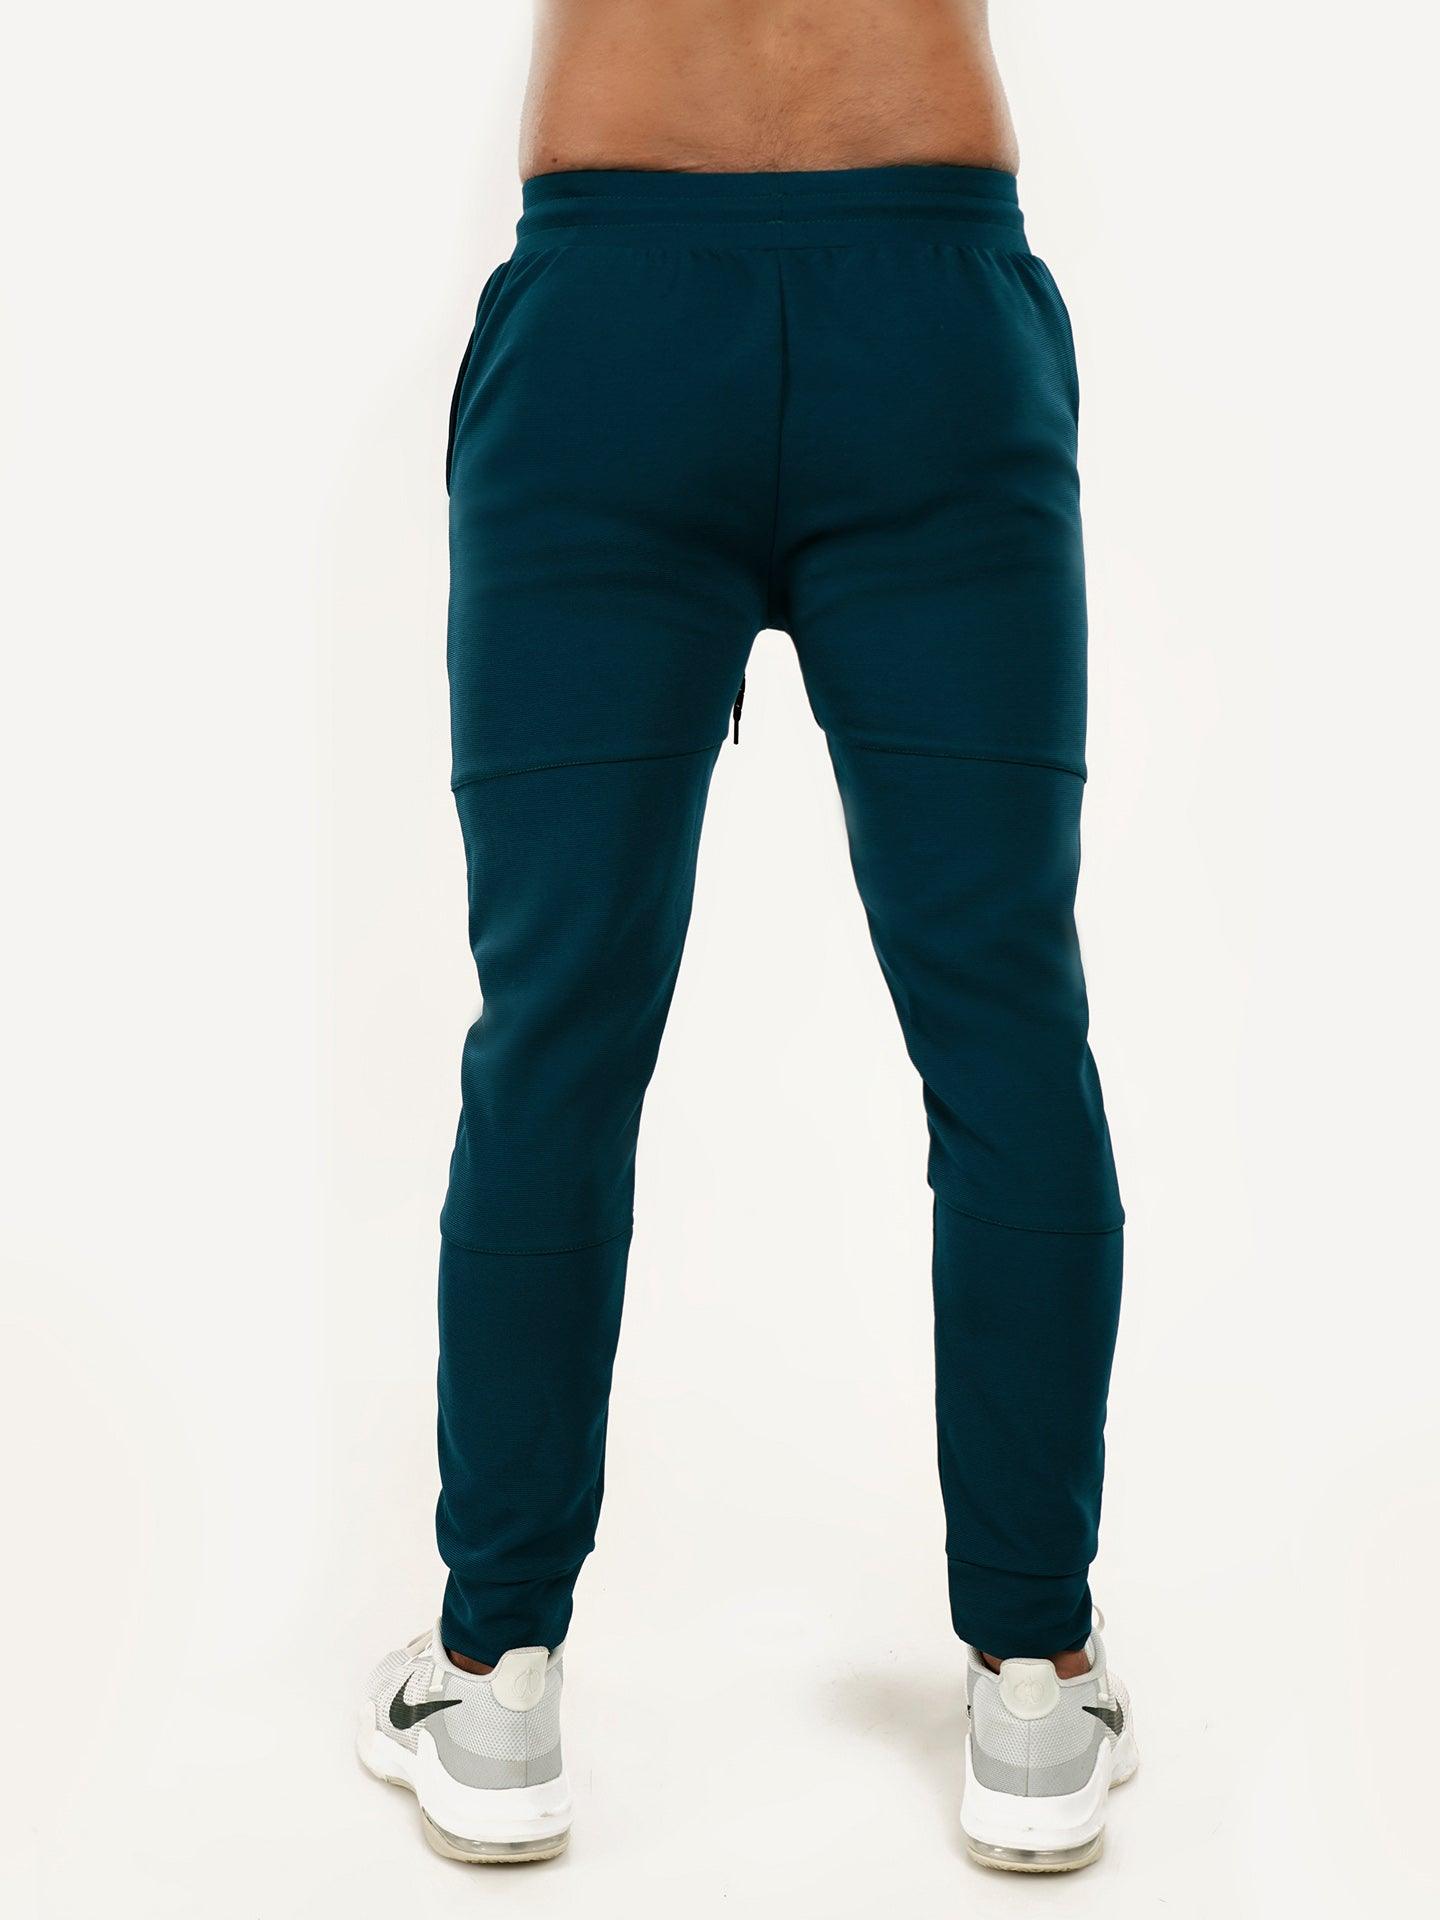 Cord GymX Bottoms: Airforce Blue- Sale - GymX